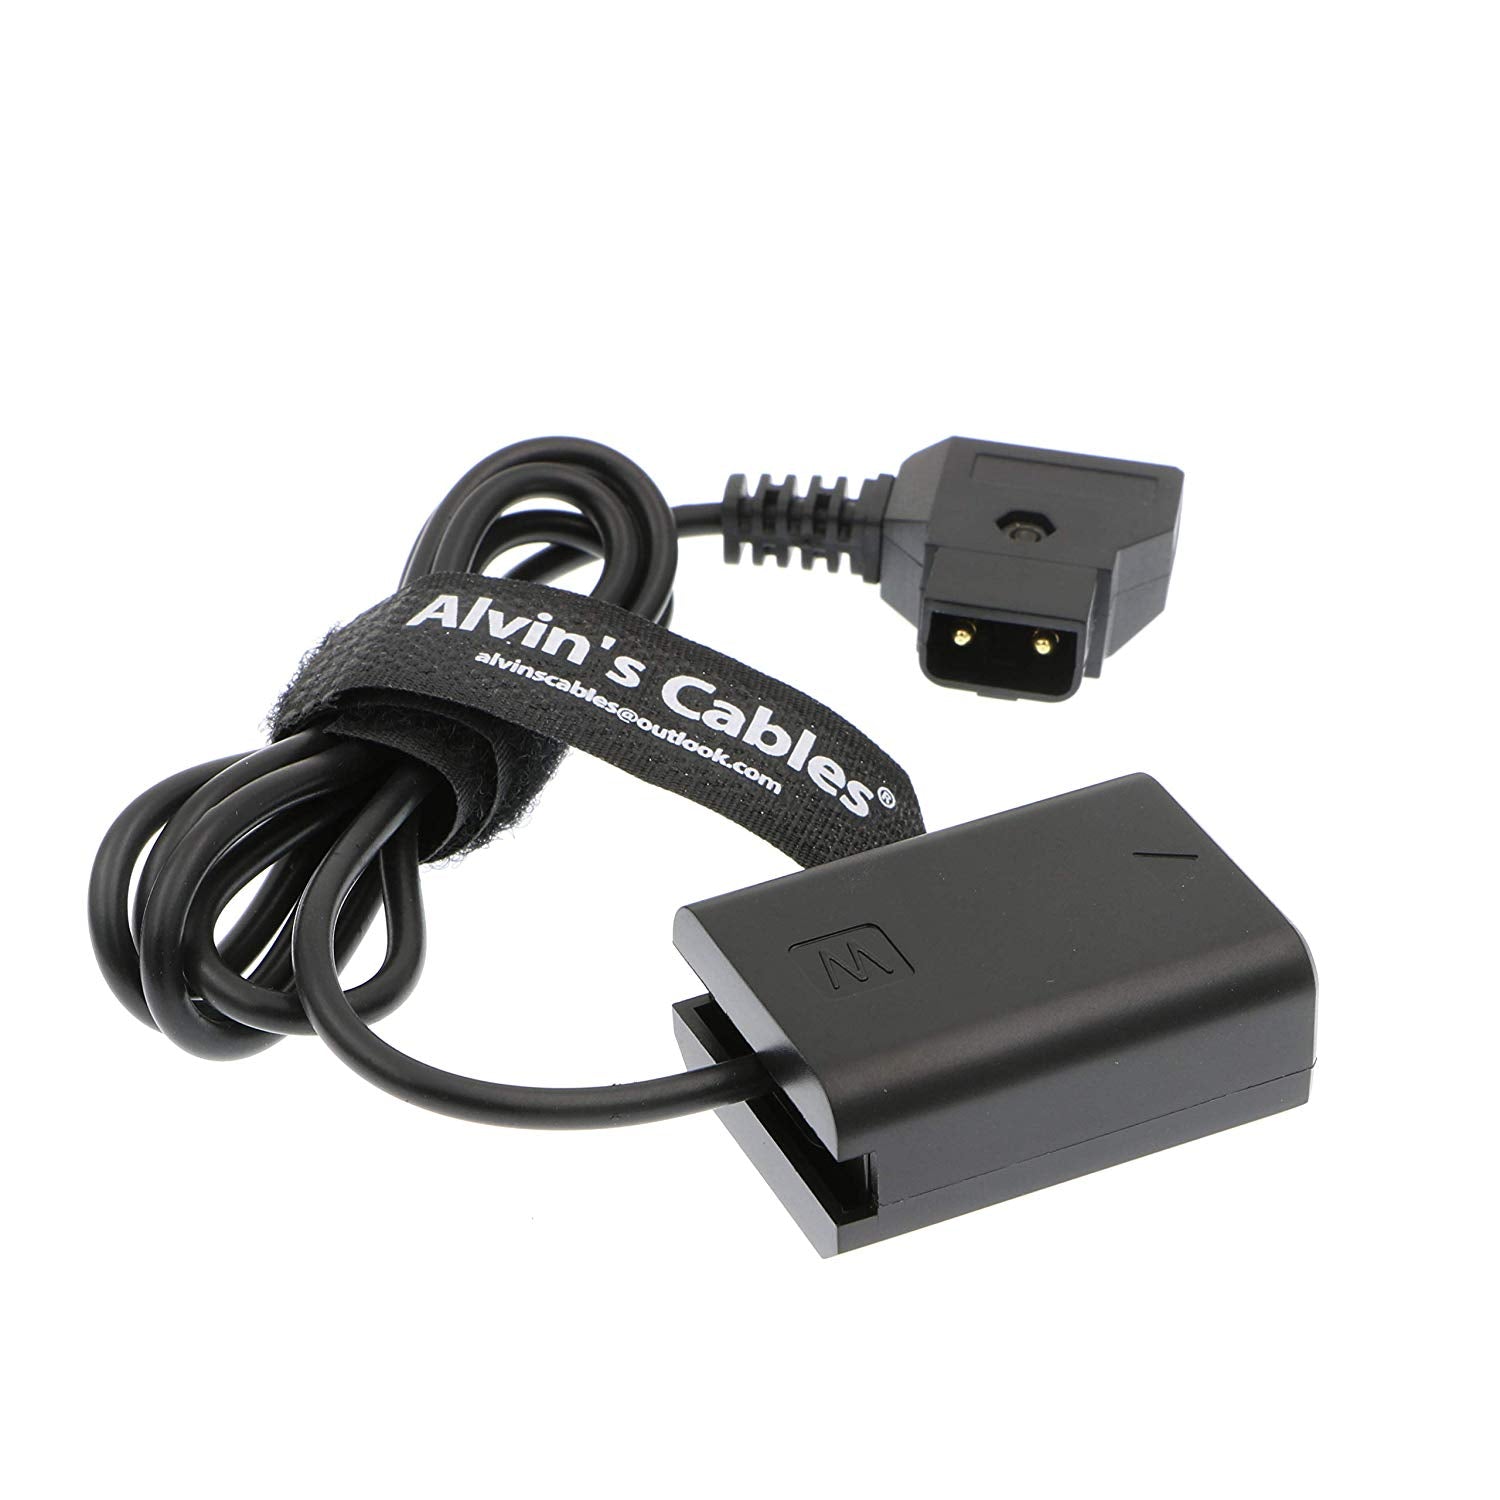 Alvin's Cables New A7 Dummy Battery to D Tap Cable for Sony A7R A7S A7II Camera